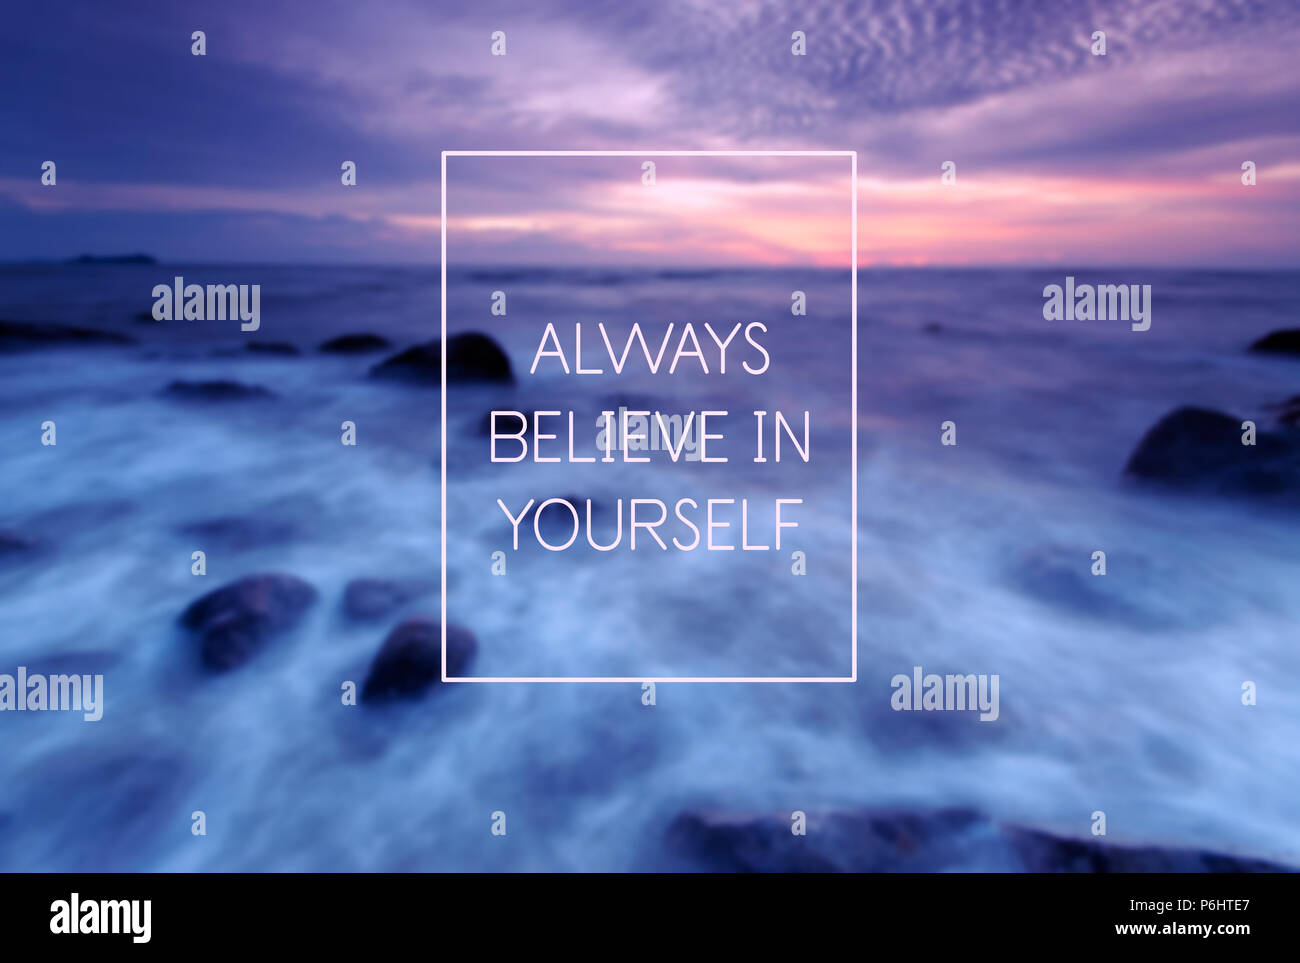 Motivational and inspiration quote - Always believe in yourself. Retro style. Stock Photo